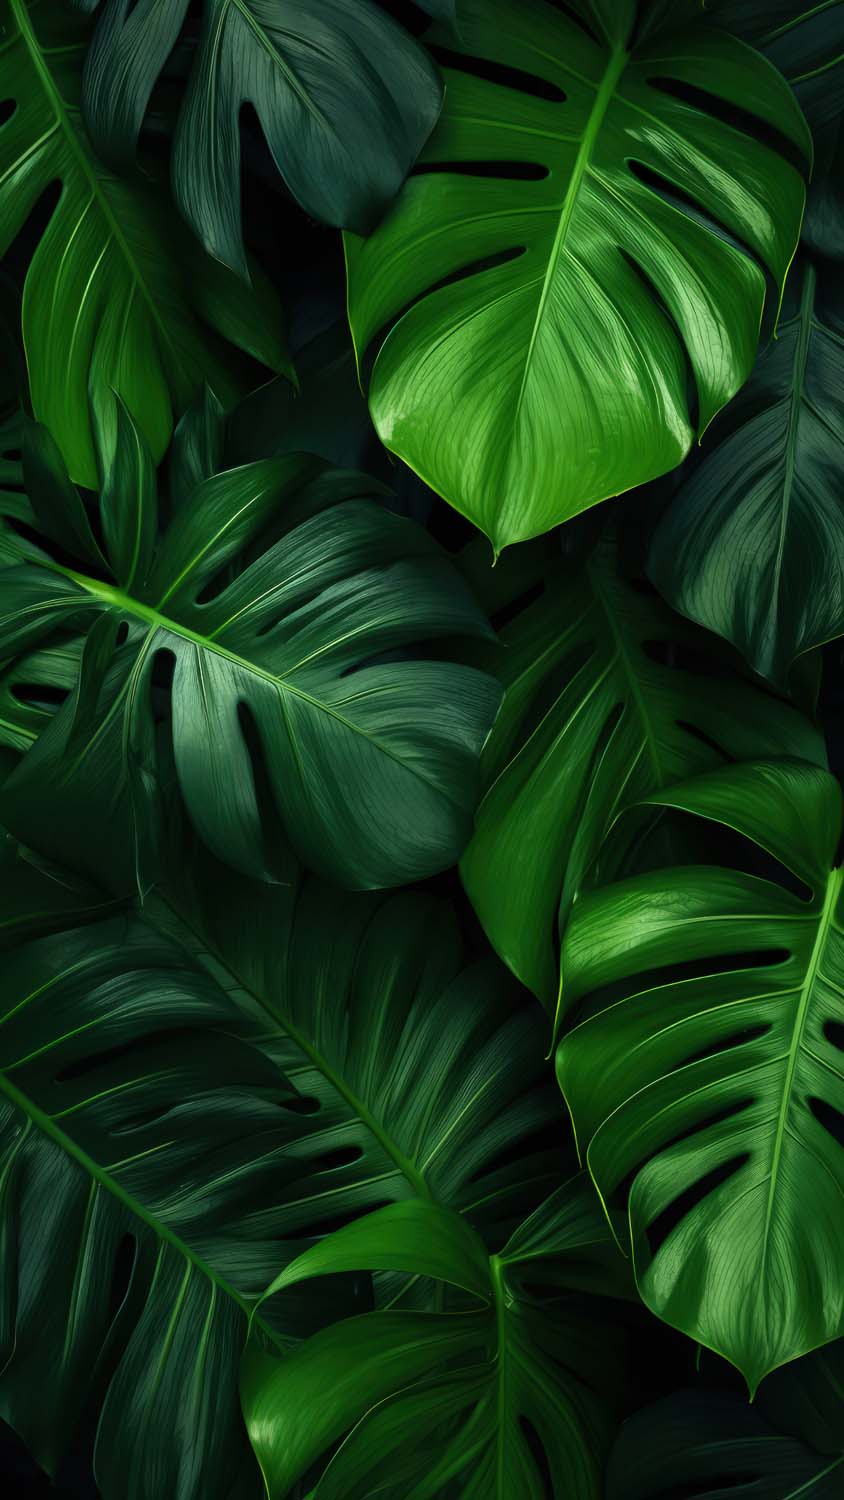 Green Foliage Leaves iPhone Wallpaper 4K